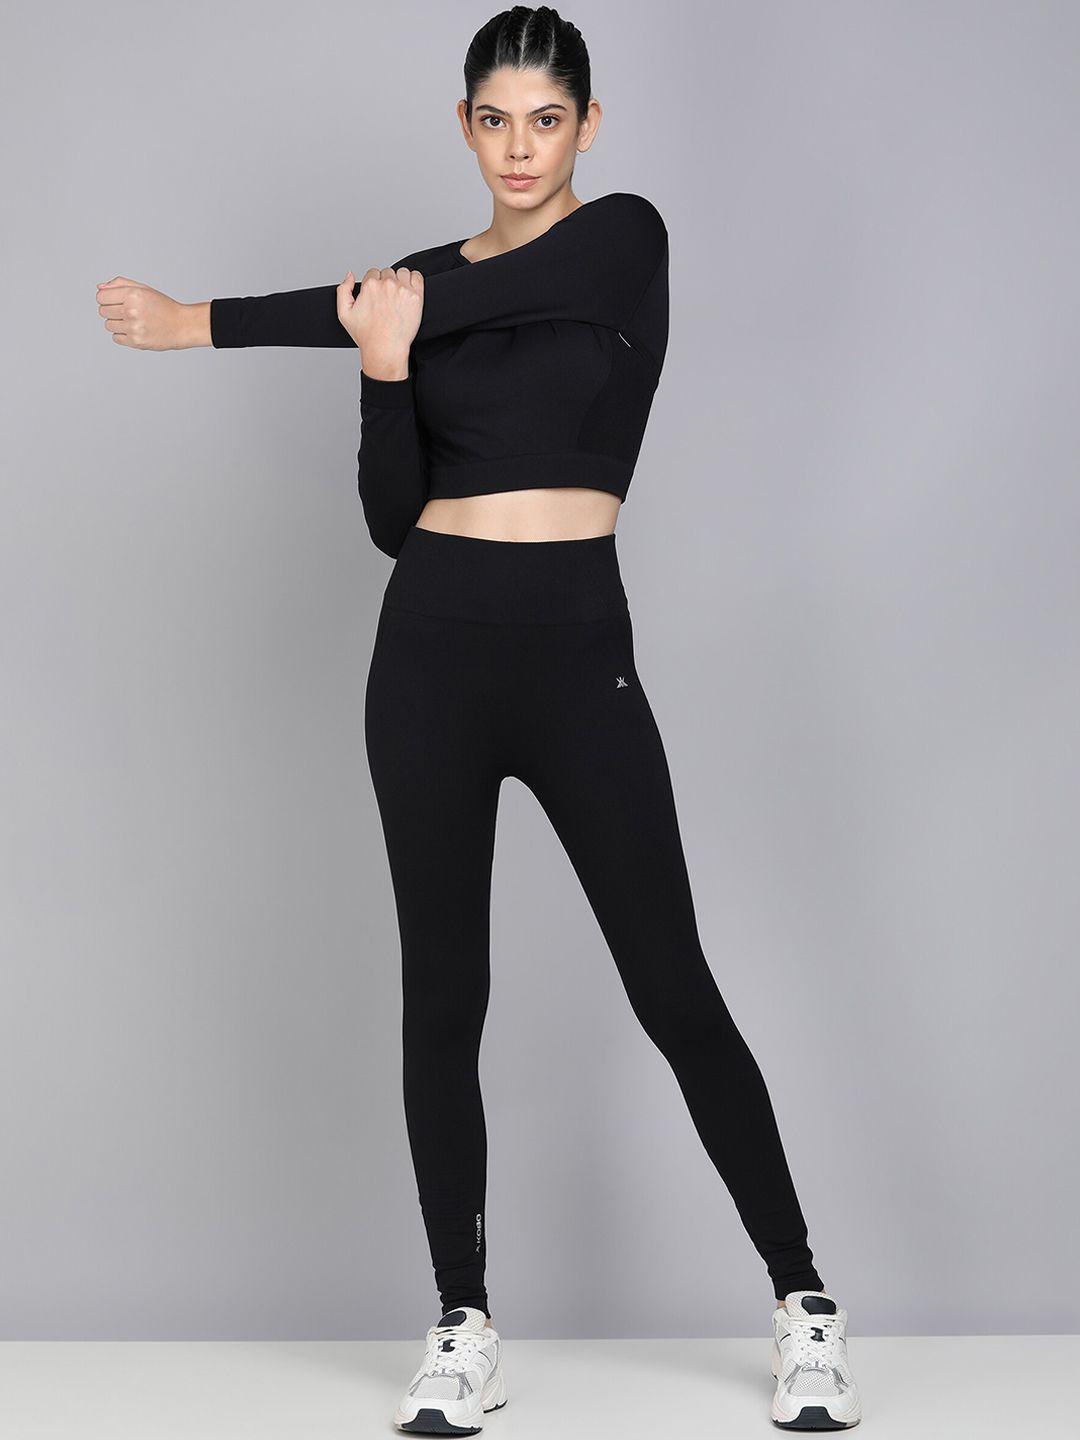 kobo super stretch long sleeves sport top & tights tracksuit